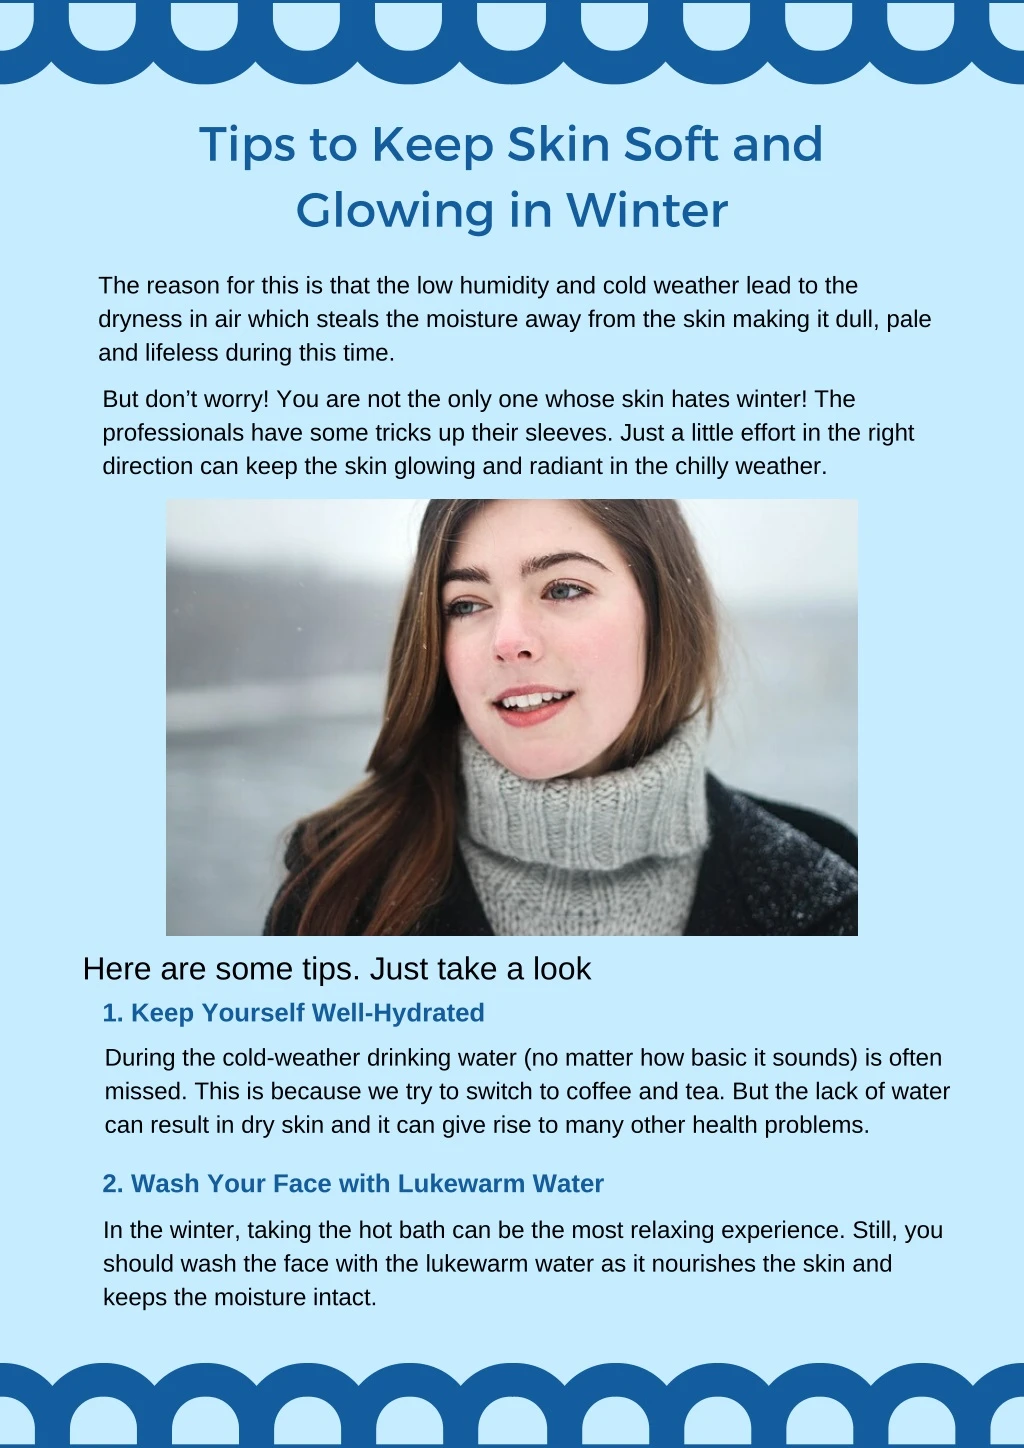 tips to keep skin soft and glowing in winter